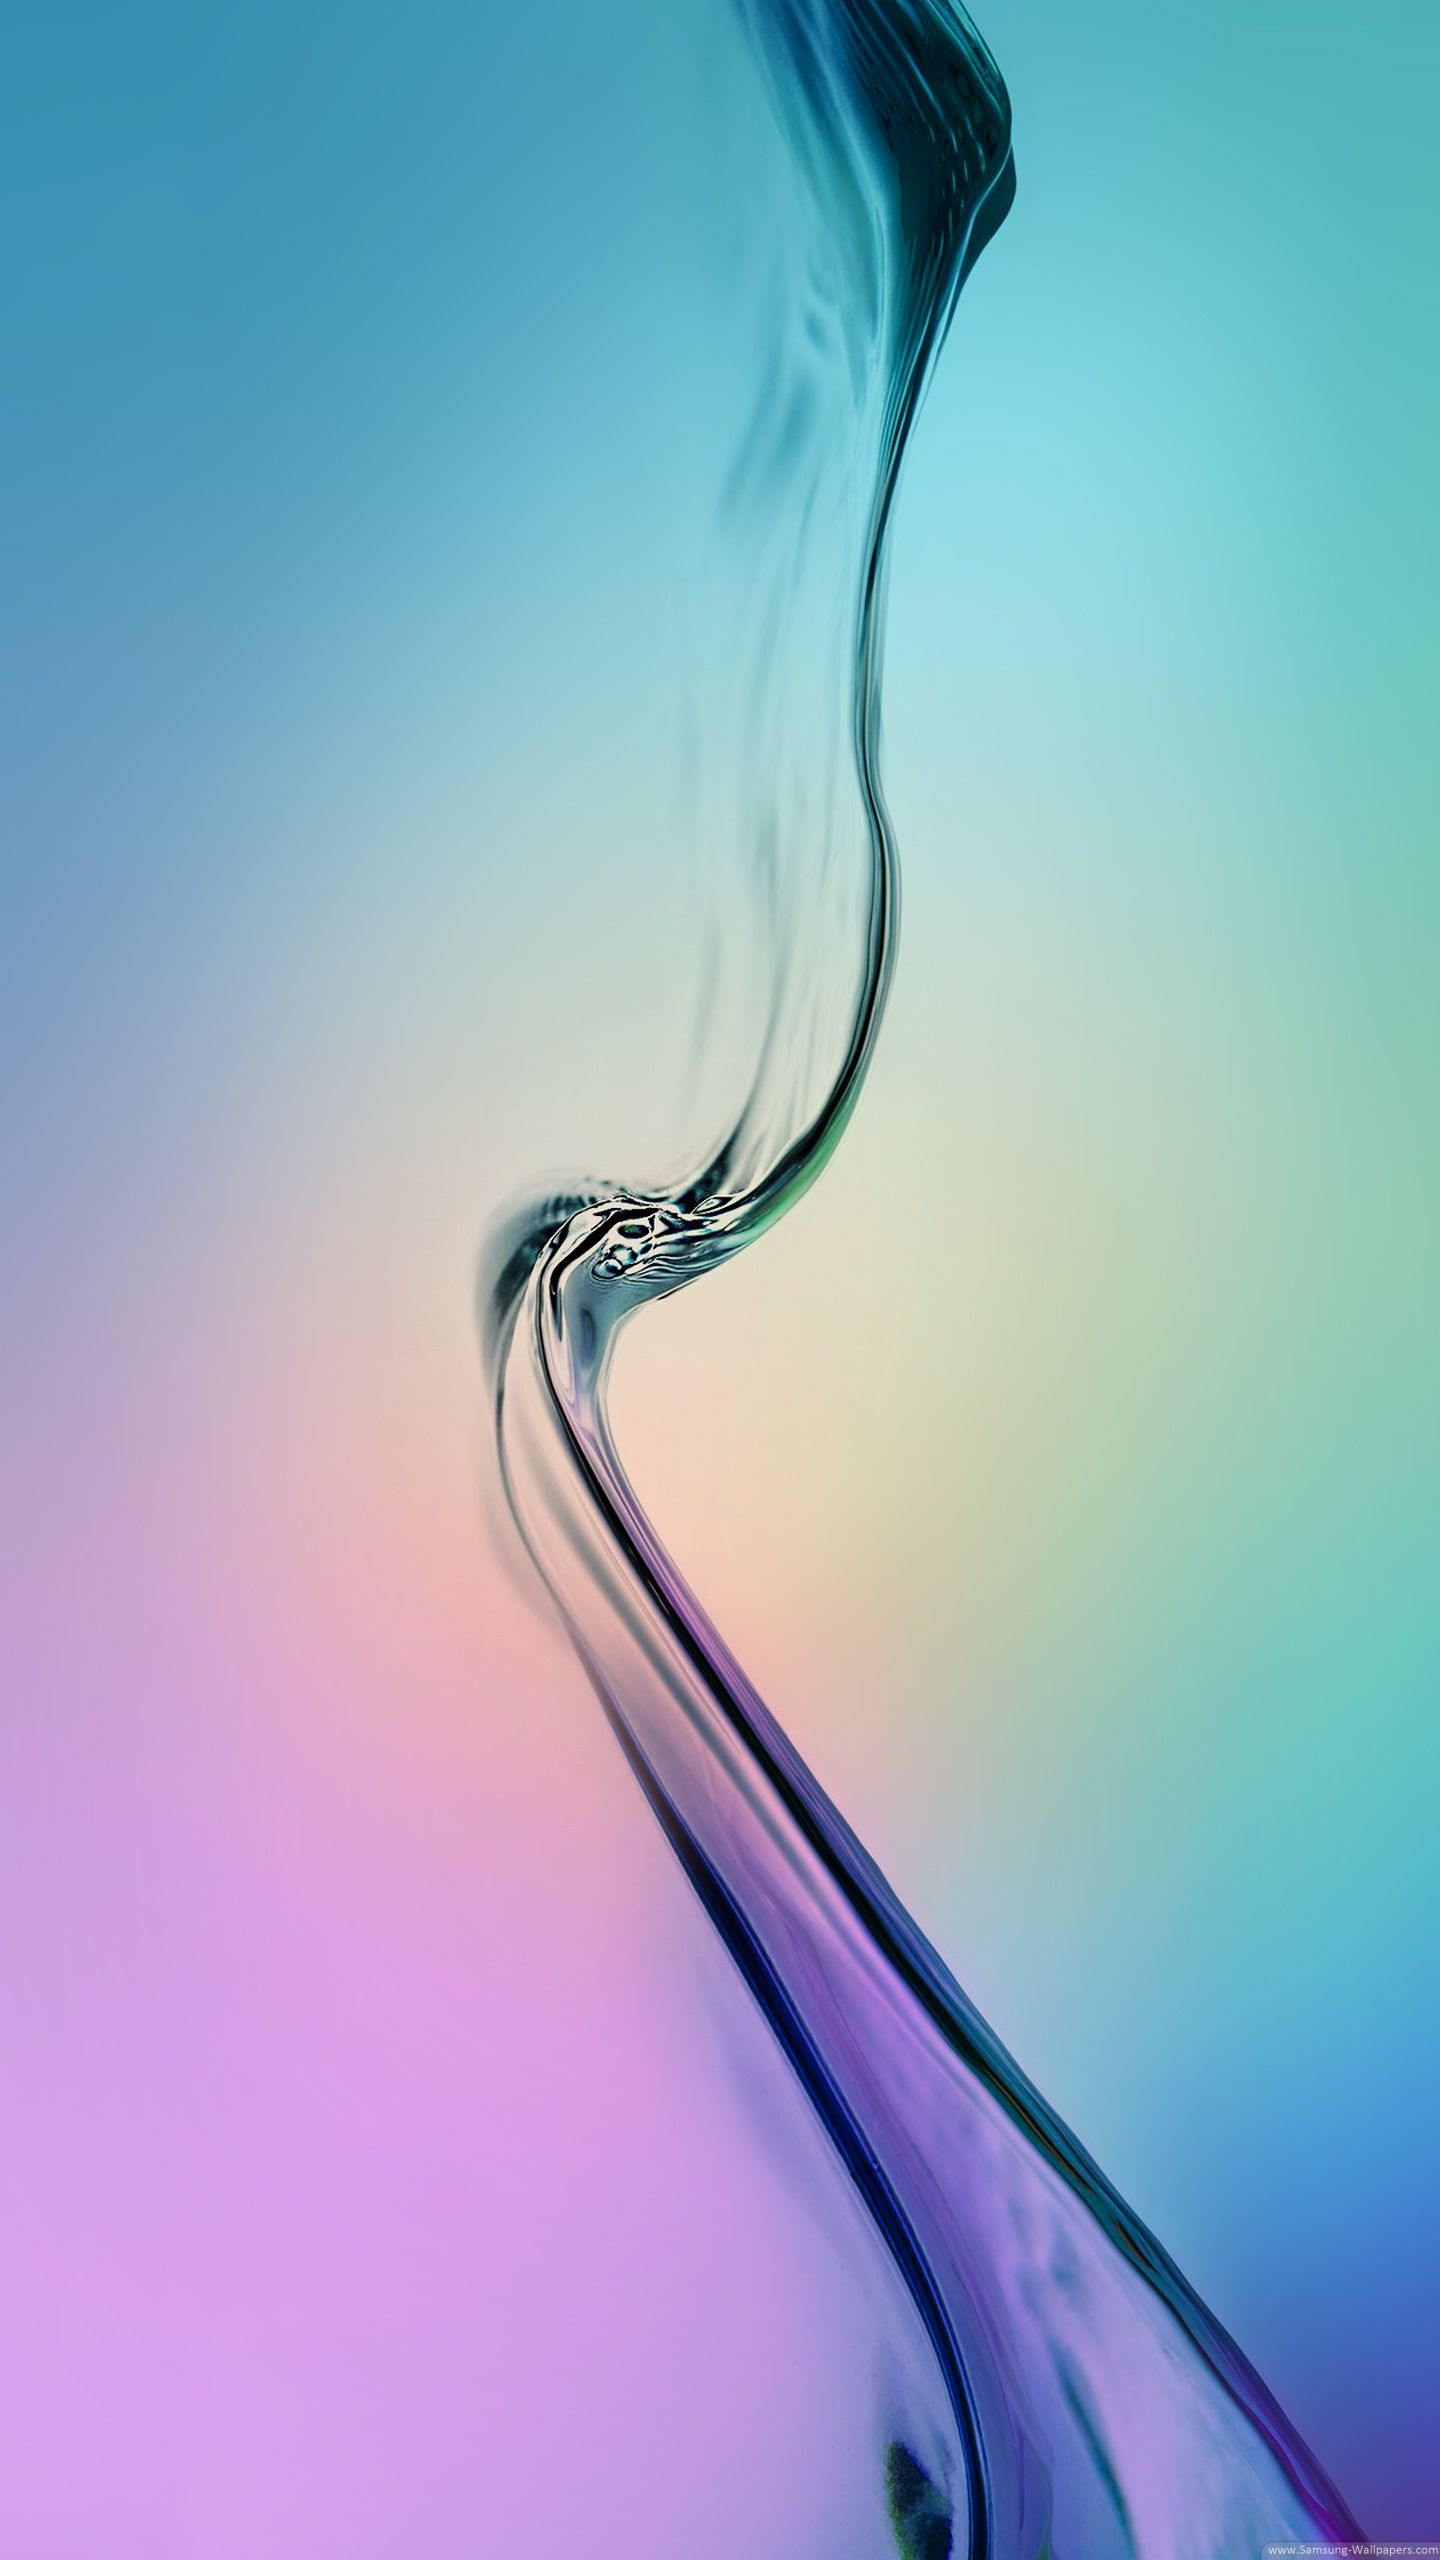 1440x2560 Samsung Galaxy S6 Edge Wallpapers Top Free Samsung Galaxy S6 Edge Backgrounds